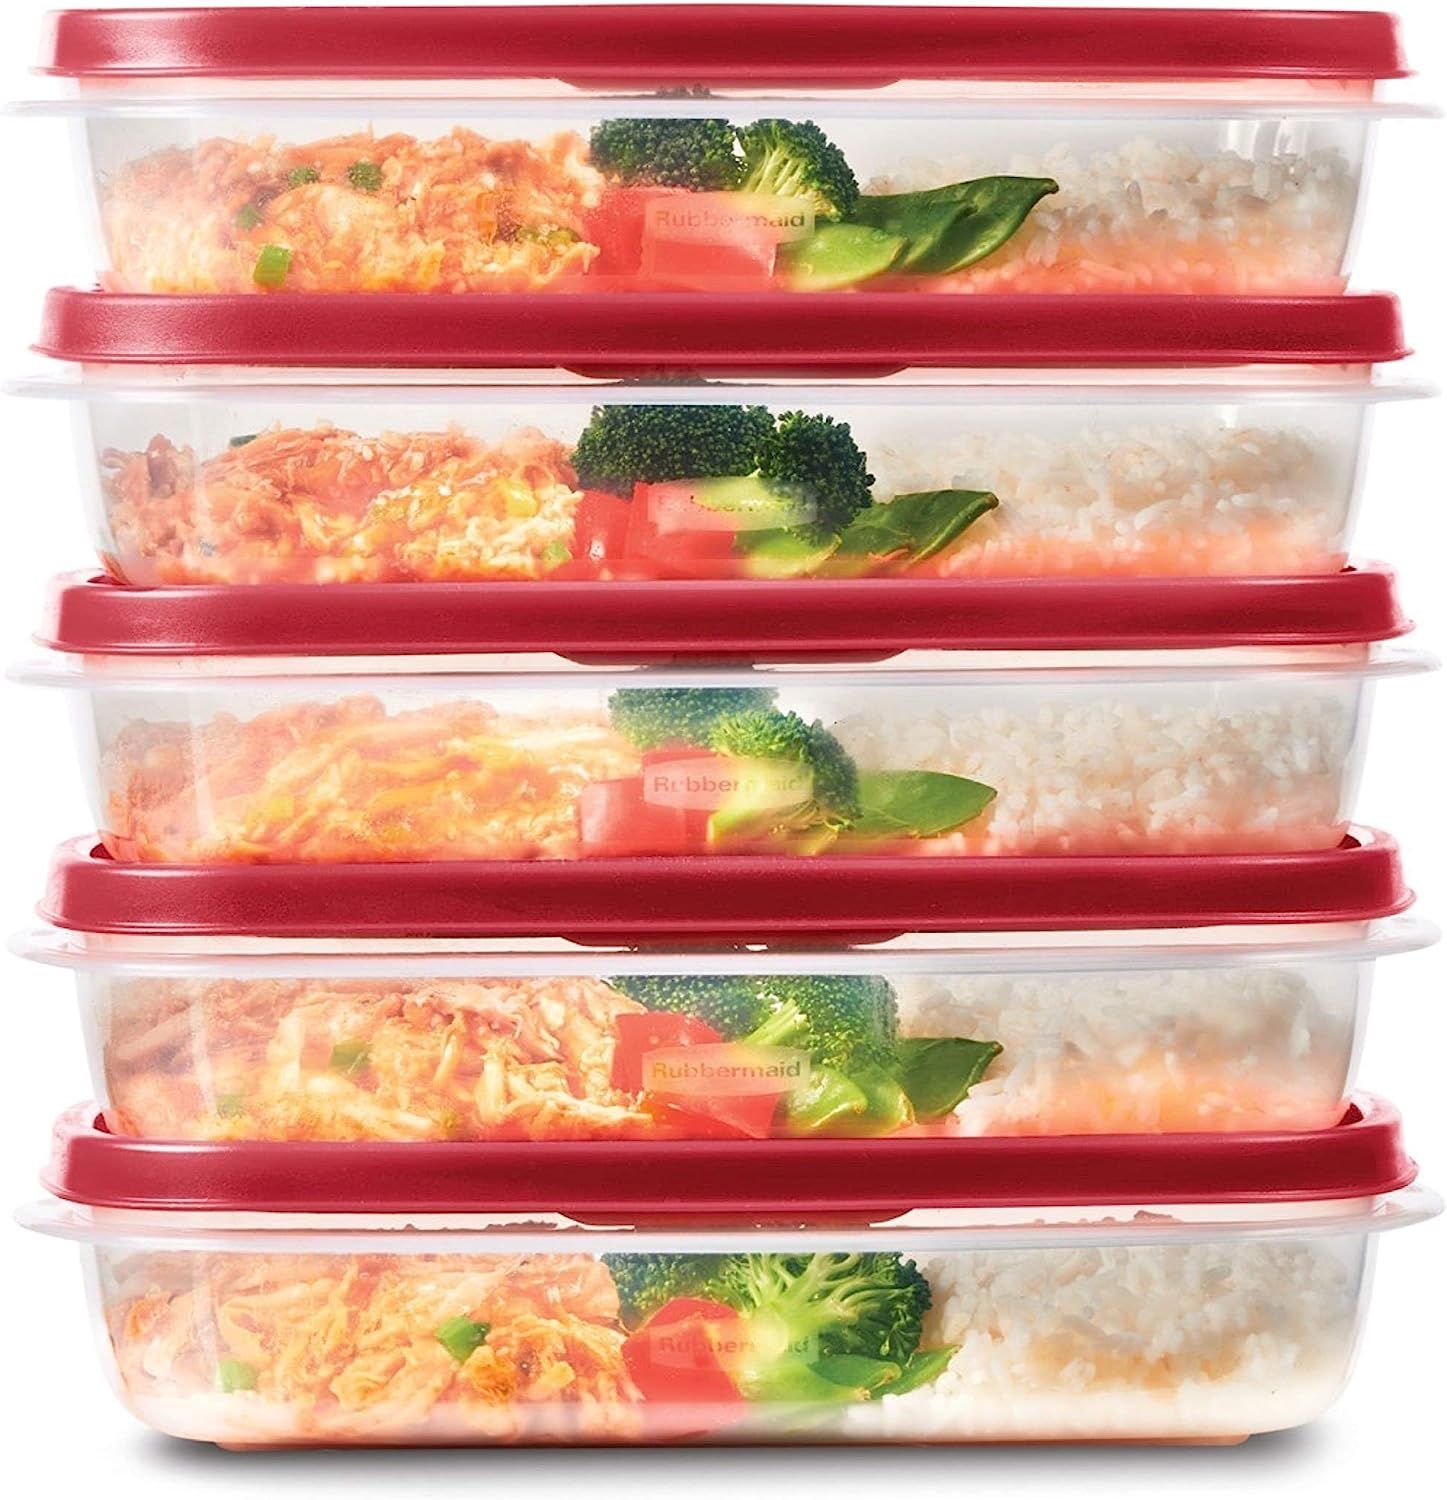 Rubbermaid EasyFindLids Meal Prep Containers, 5.5 Cup, Red | Amazon (US)